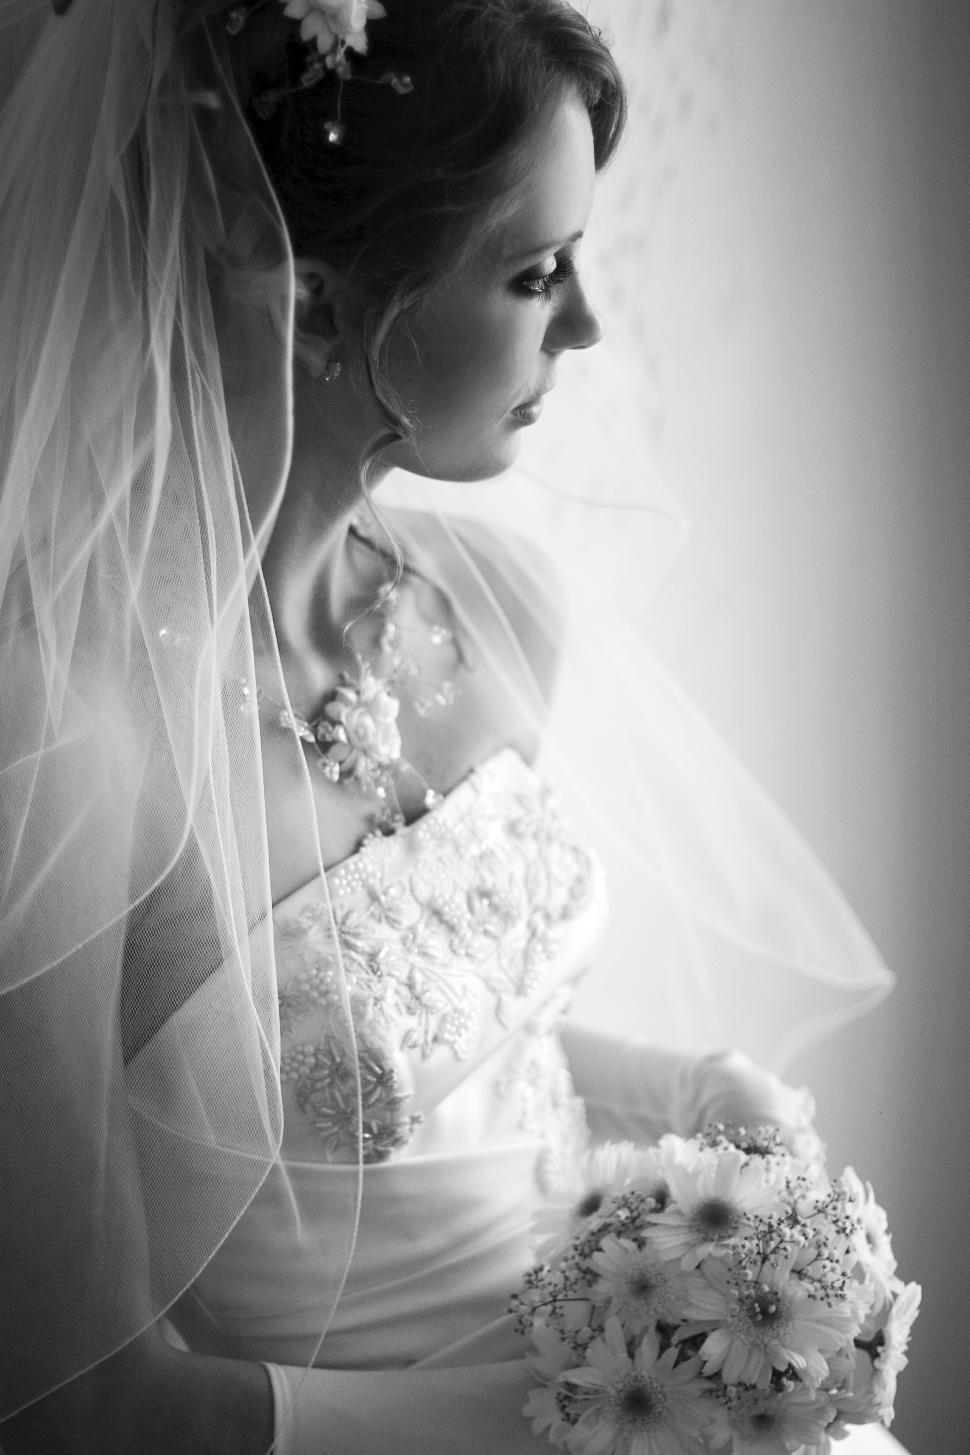 Free Image of Bride with bouquet, black and white 